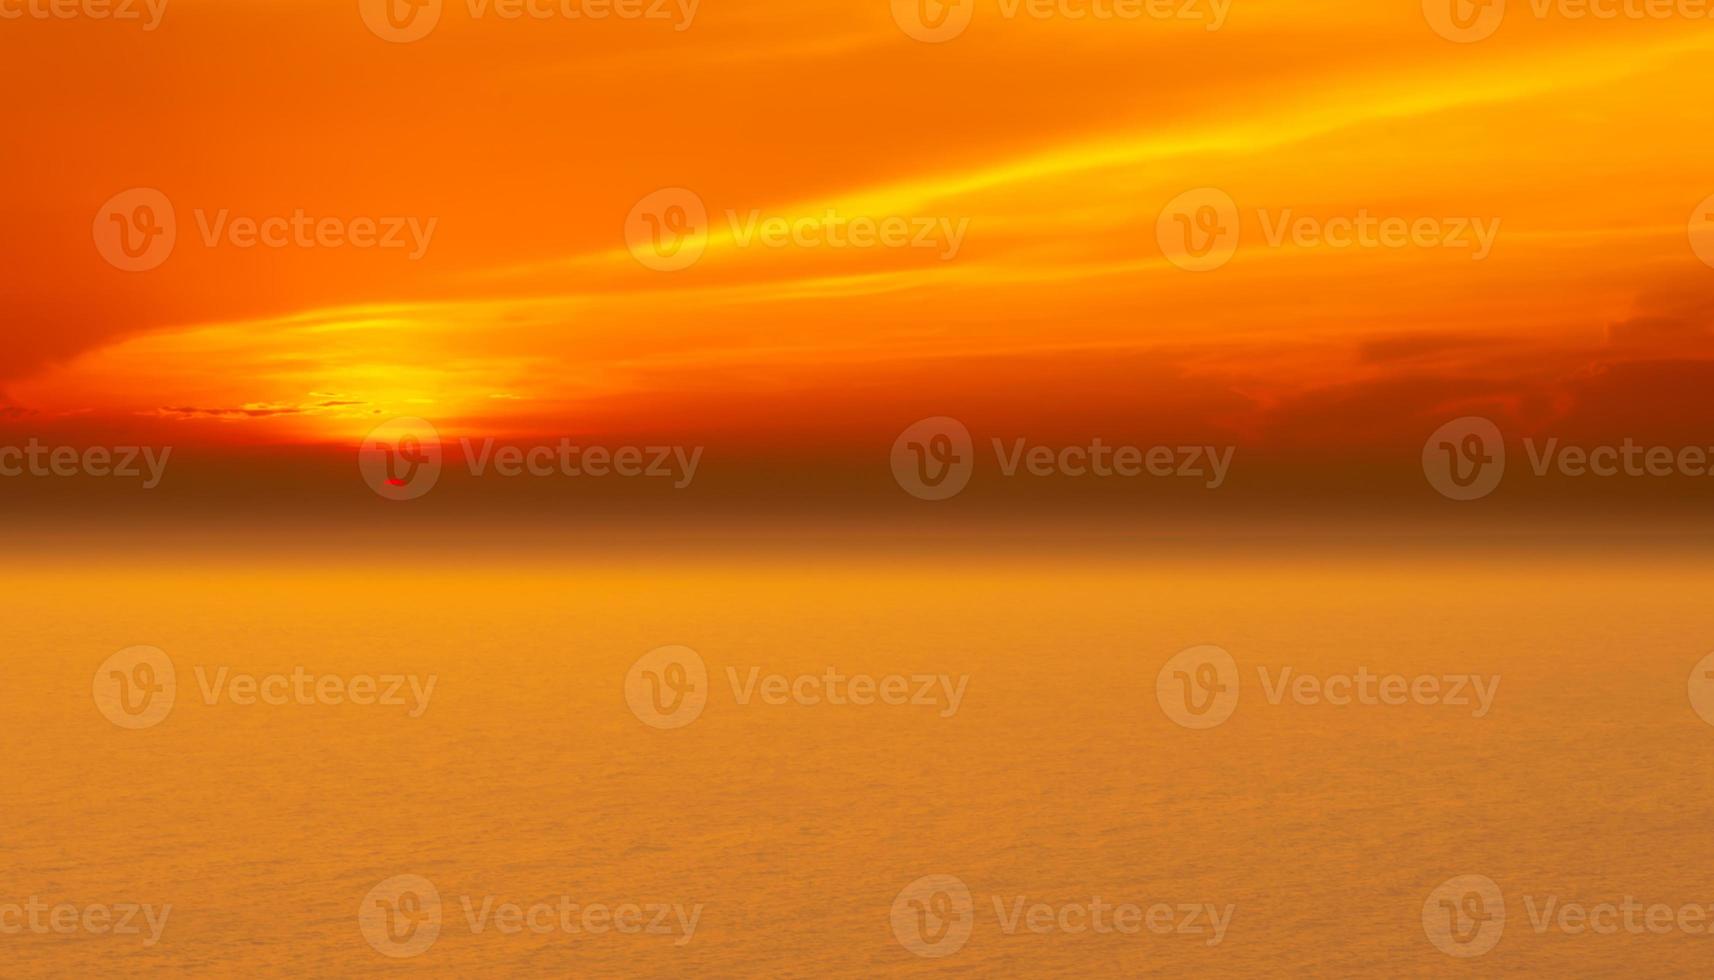 Seascapes of beautiful sunset on the sea beach with Orange sky on vacation photo